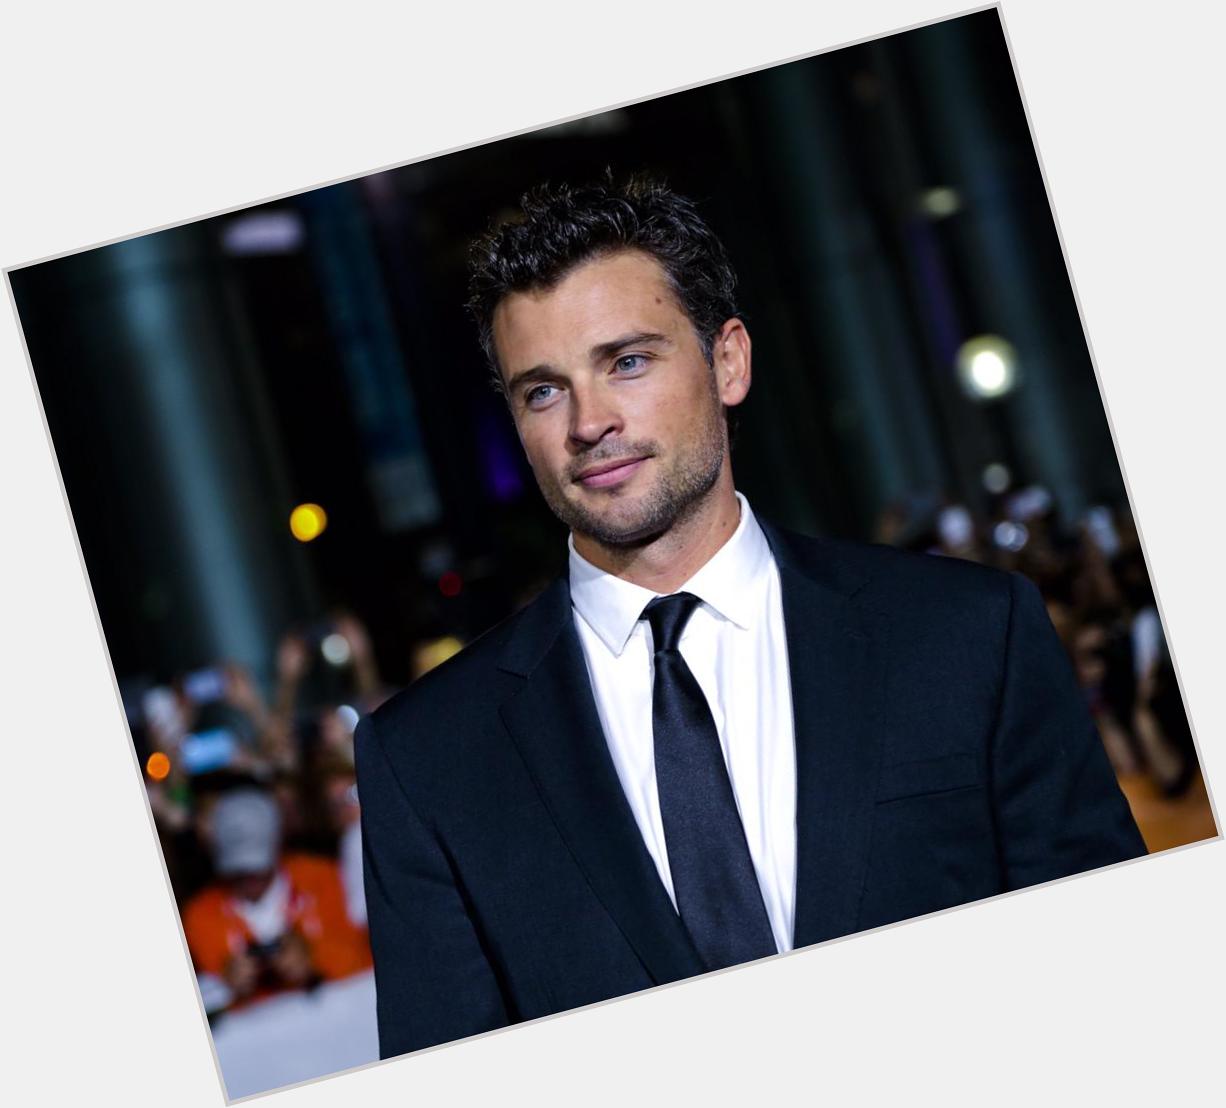 Also, HAPPY FLIPPING BIRTHDAY TO MY FIRST LOVE, CLARK KENT   aka Tom Welling  